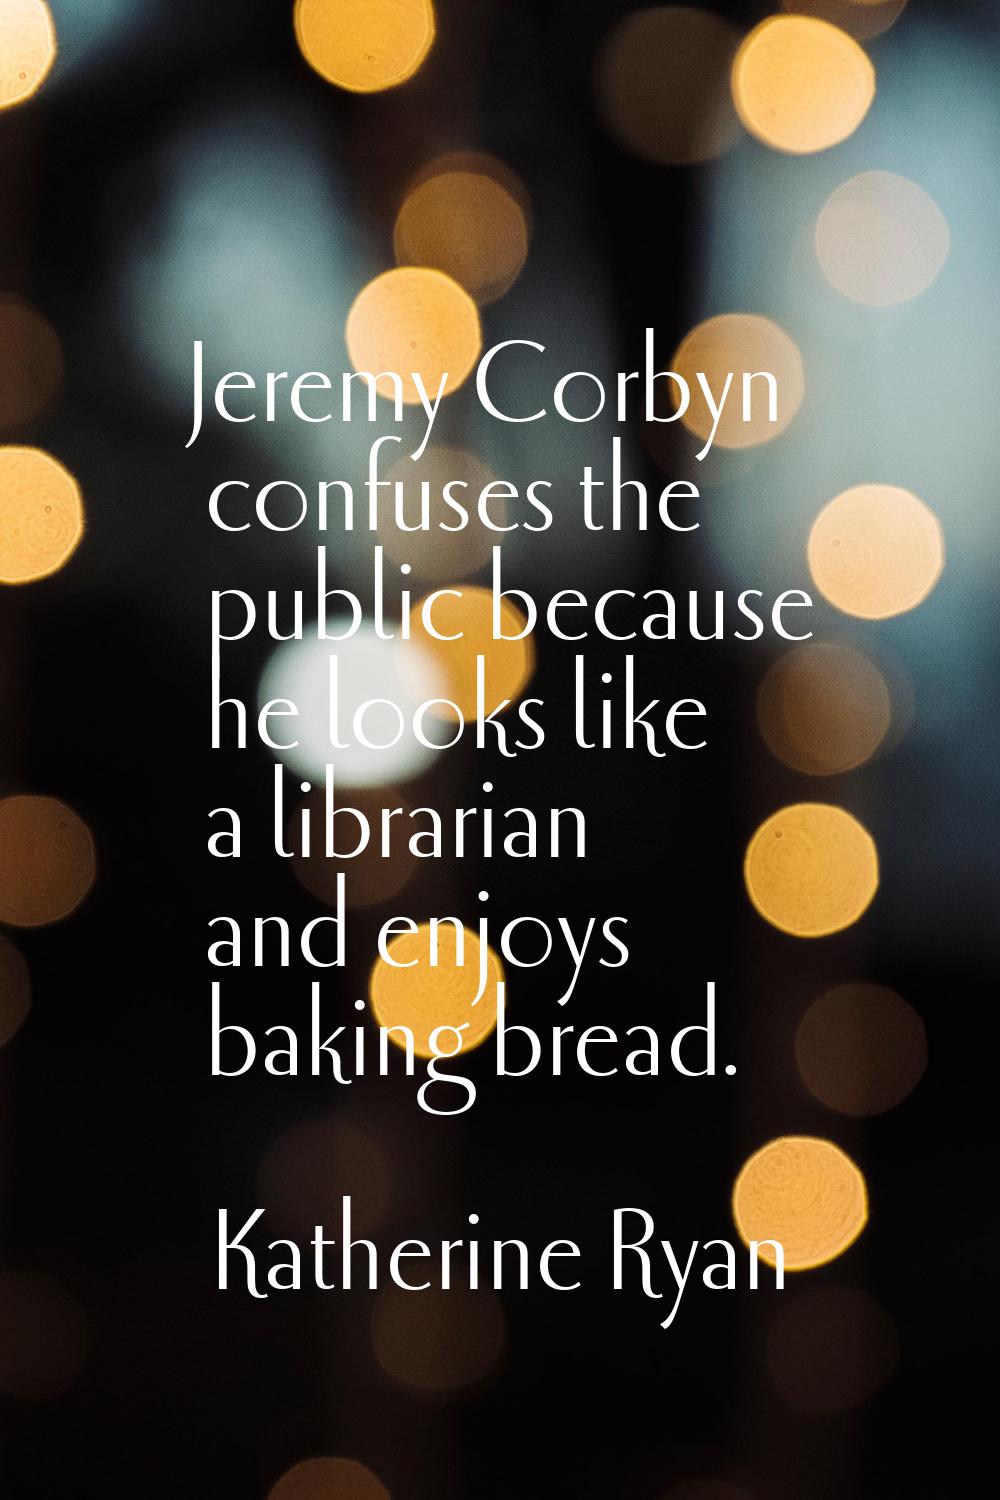 Jeremy Corbyn confuses the public because he looks like a librarian and enjoys baking bread.